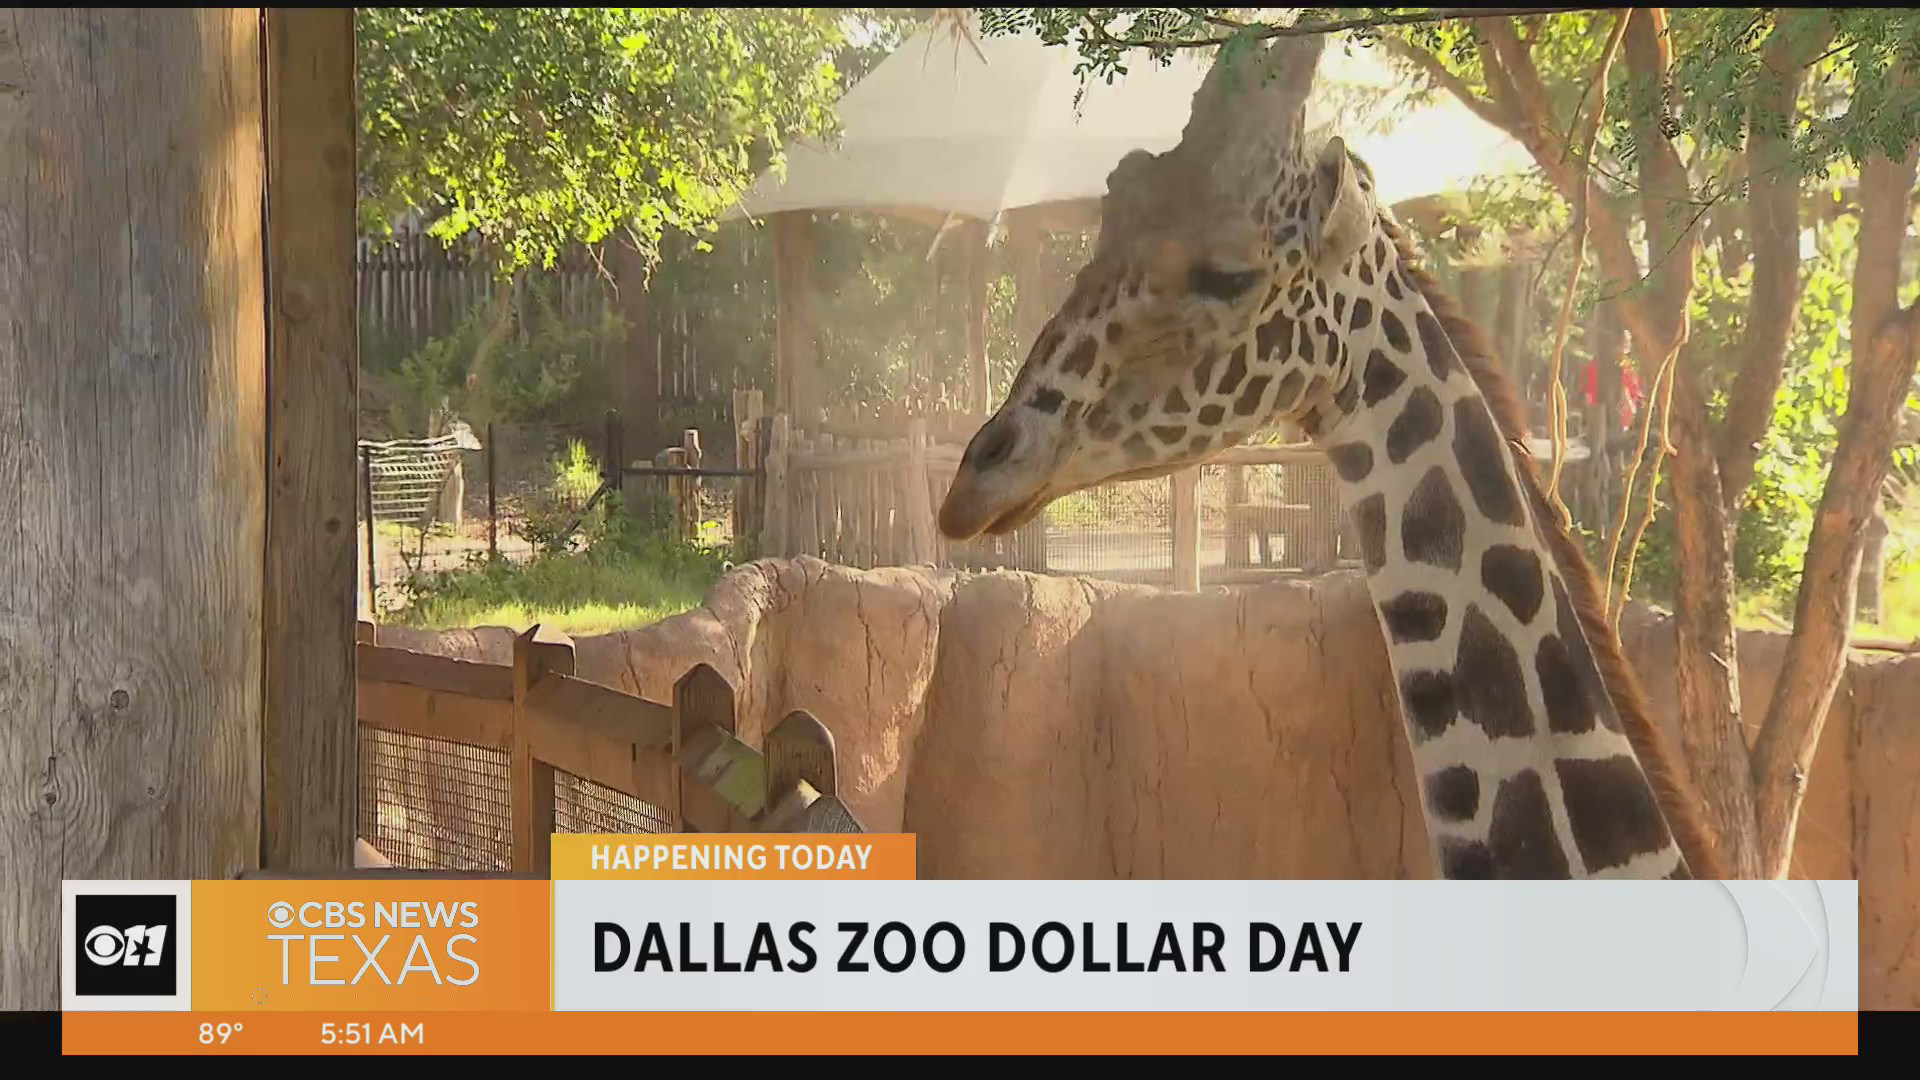 Dollar Days are back at the Dallas Zoo!